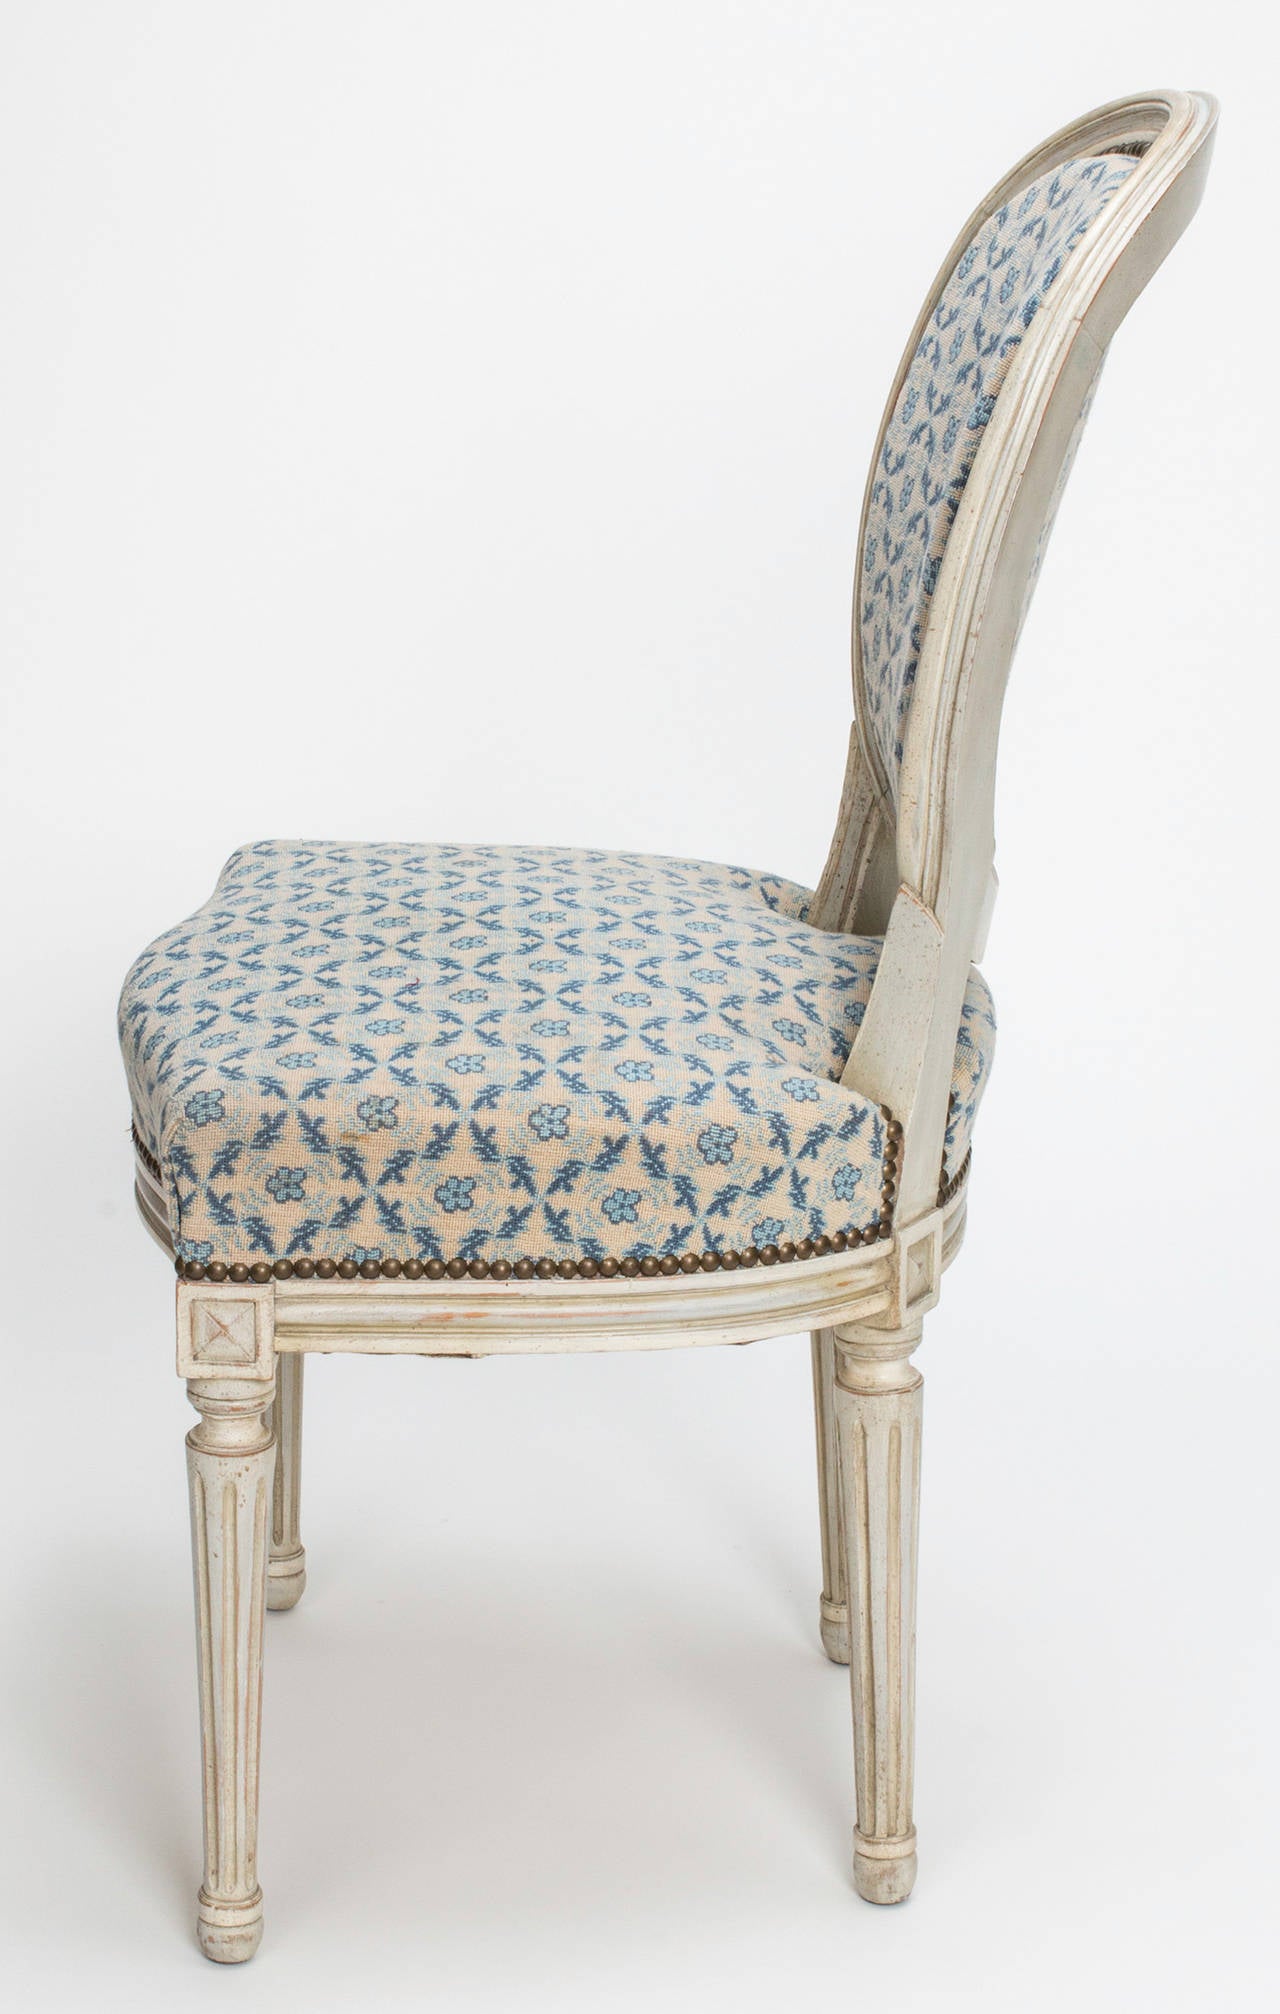 C.1890s Louis XVI Style Painted Dining Chairs set of four In Excellent Condition For Sale In Summerland, CA